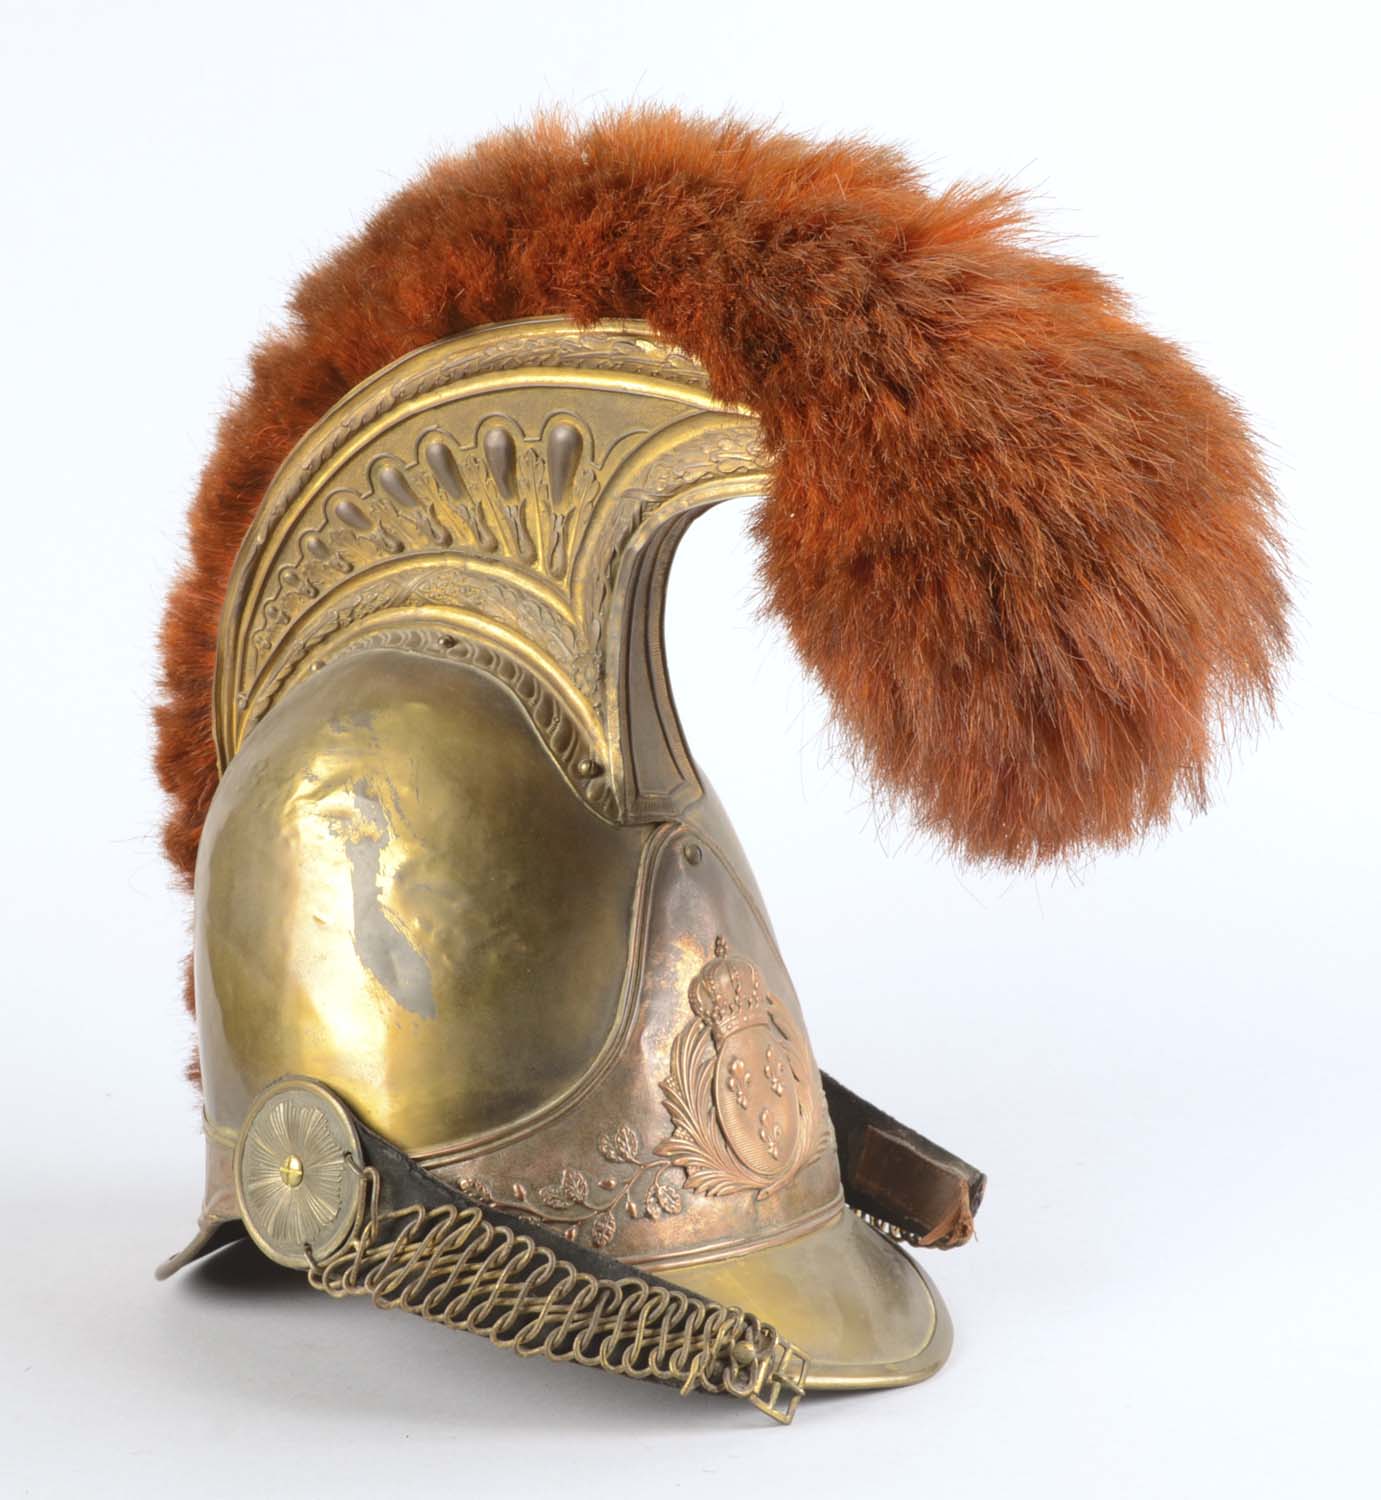 French Cuirassier or Chasseur Helmet, lot 172